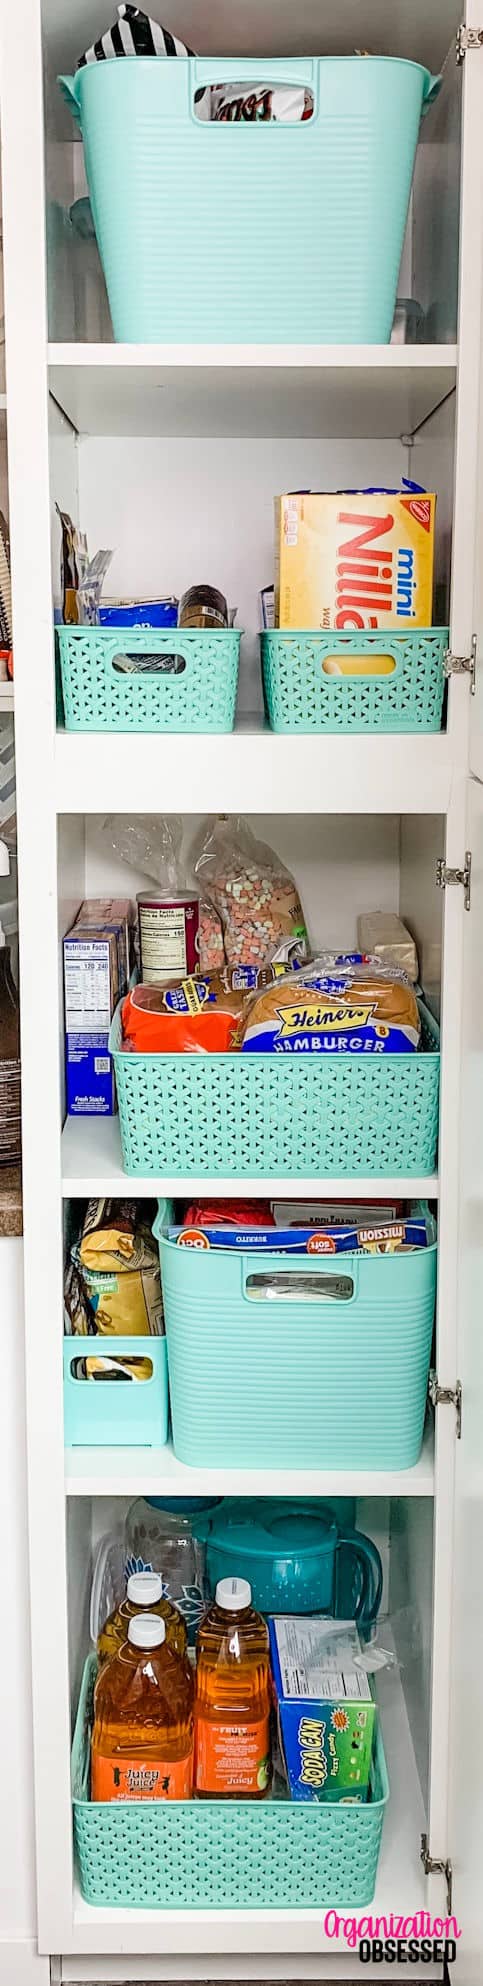 https://www.organizationobsessed.com/wp-content/uploads/Organizing-a-Small-Pantry-Cabinet-1-1.jpg